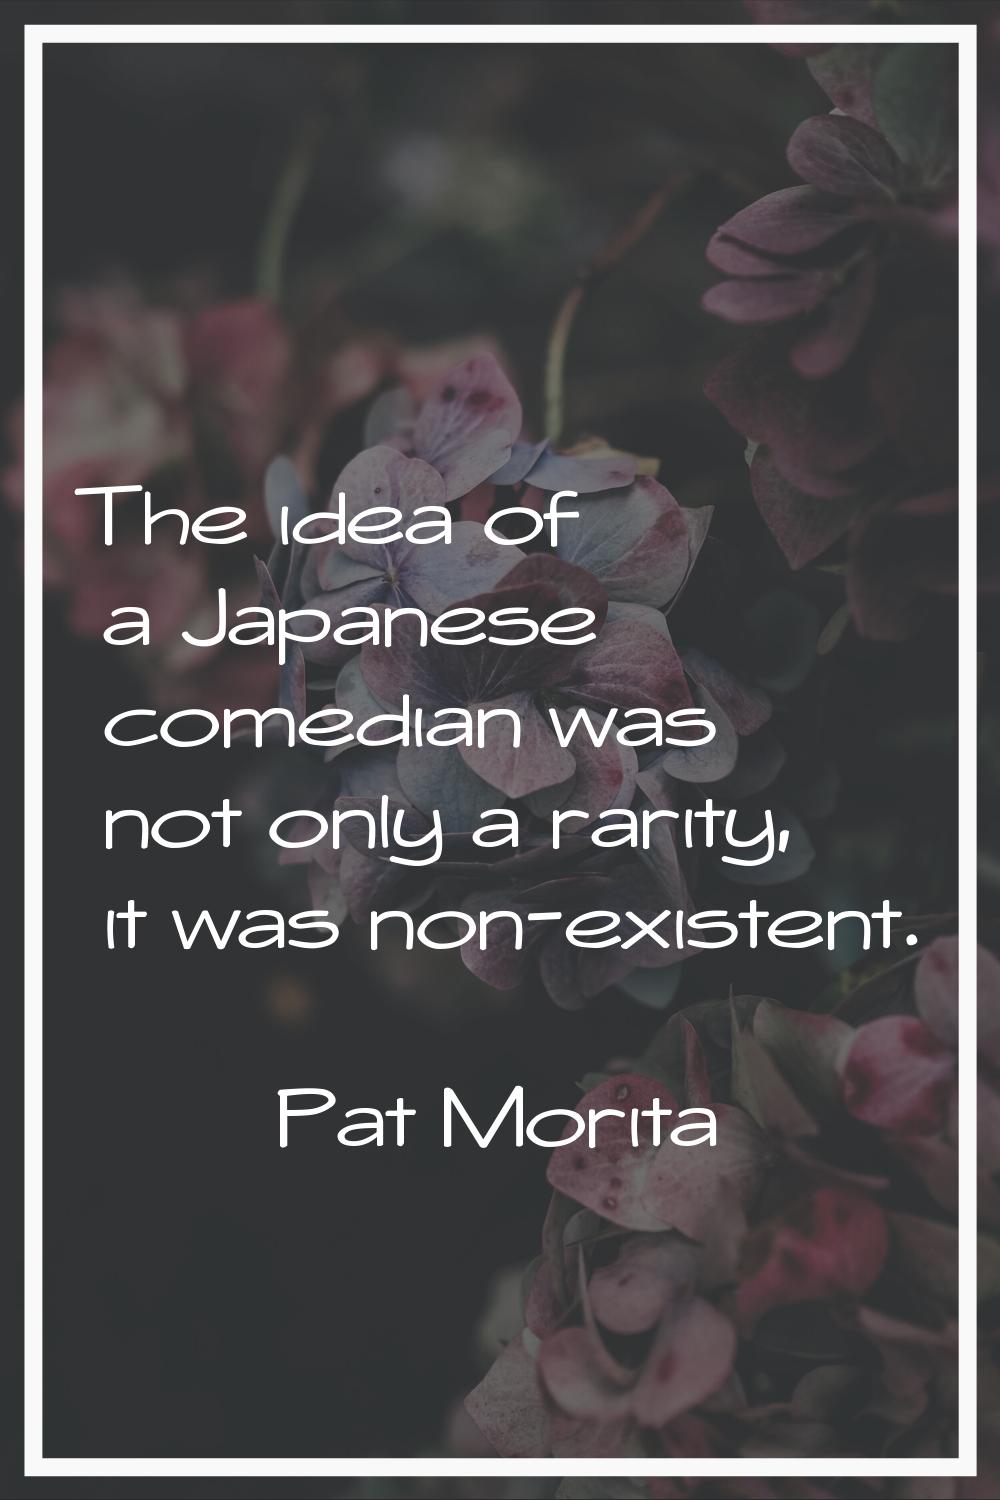 The idea of a Japanese comedian was not only a rarity, it was non-existent.